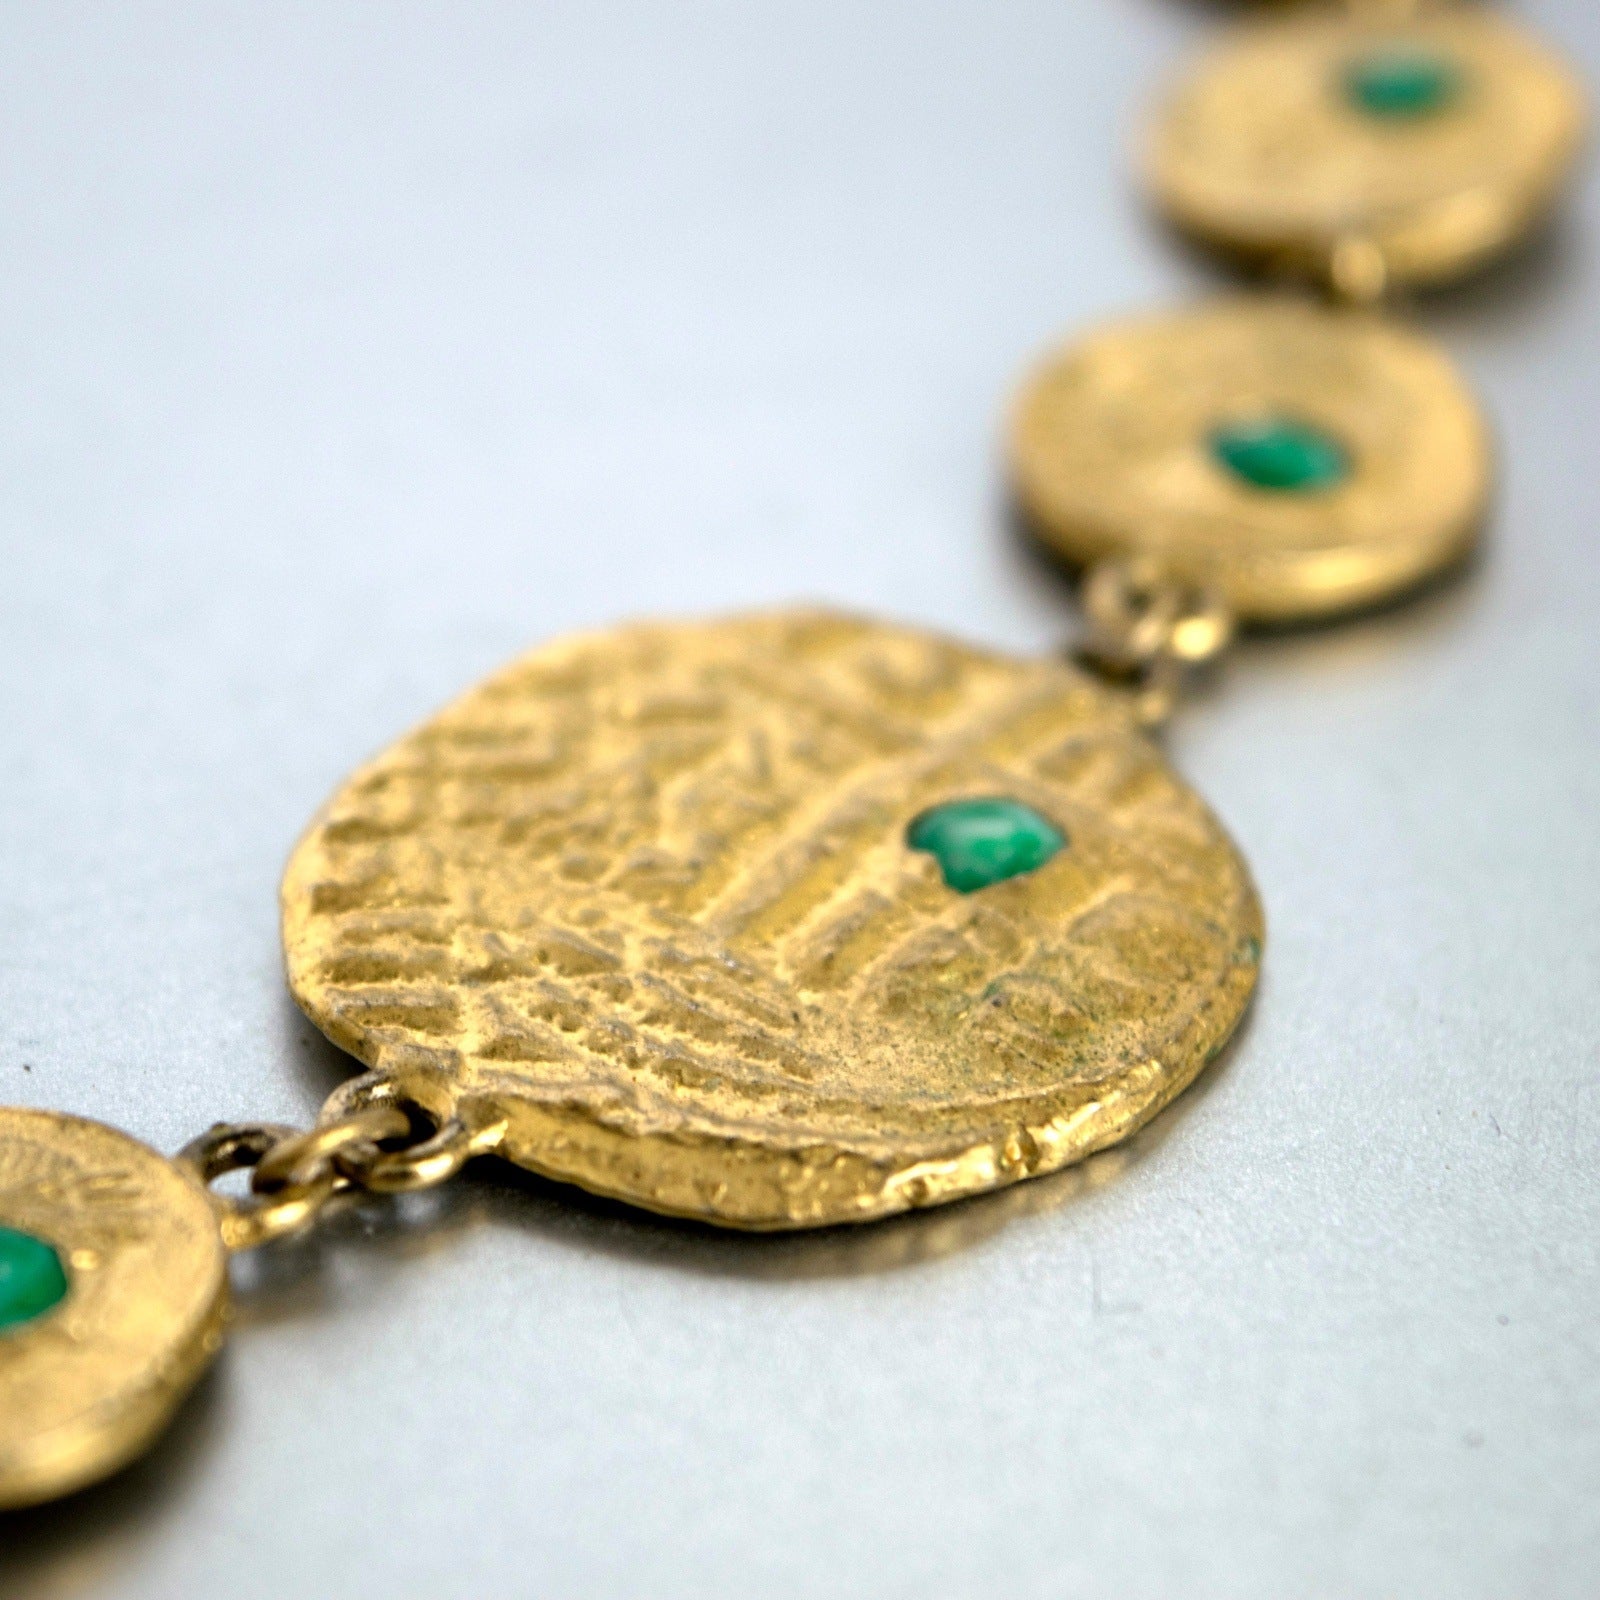 Pauline Rader Ancient Coins Necklace Vintage Jewelry ESPOSITO